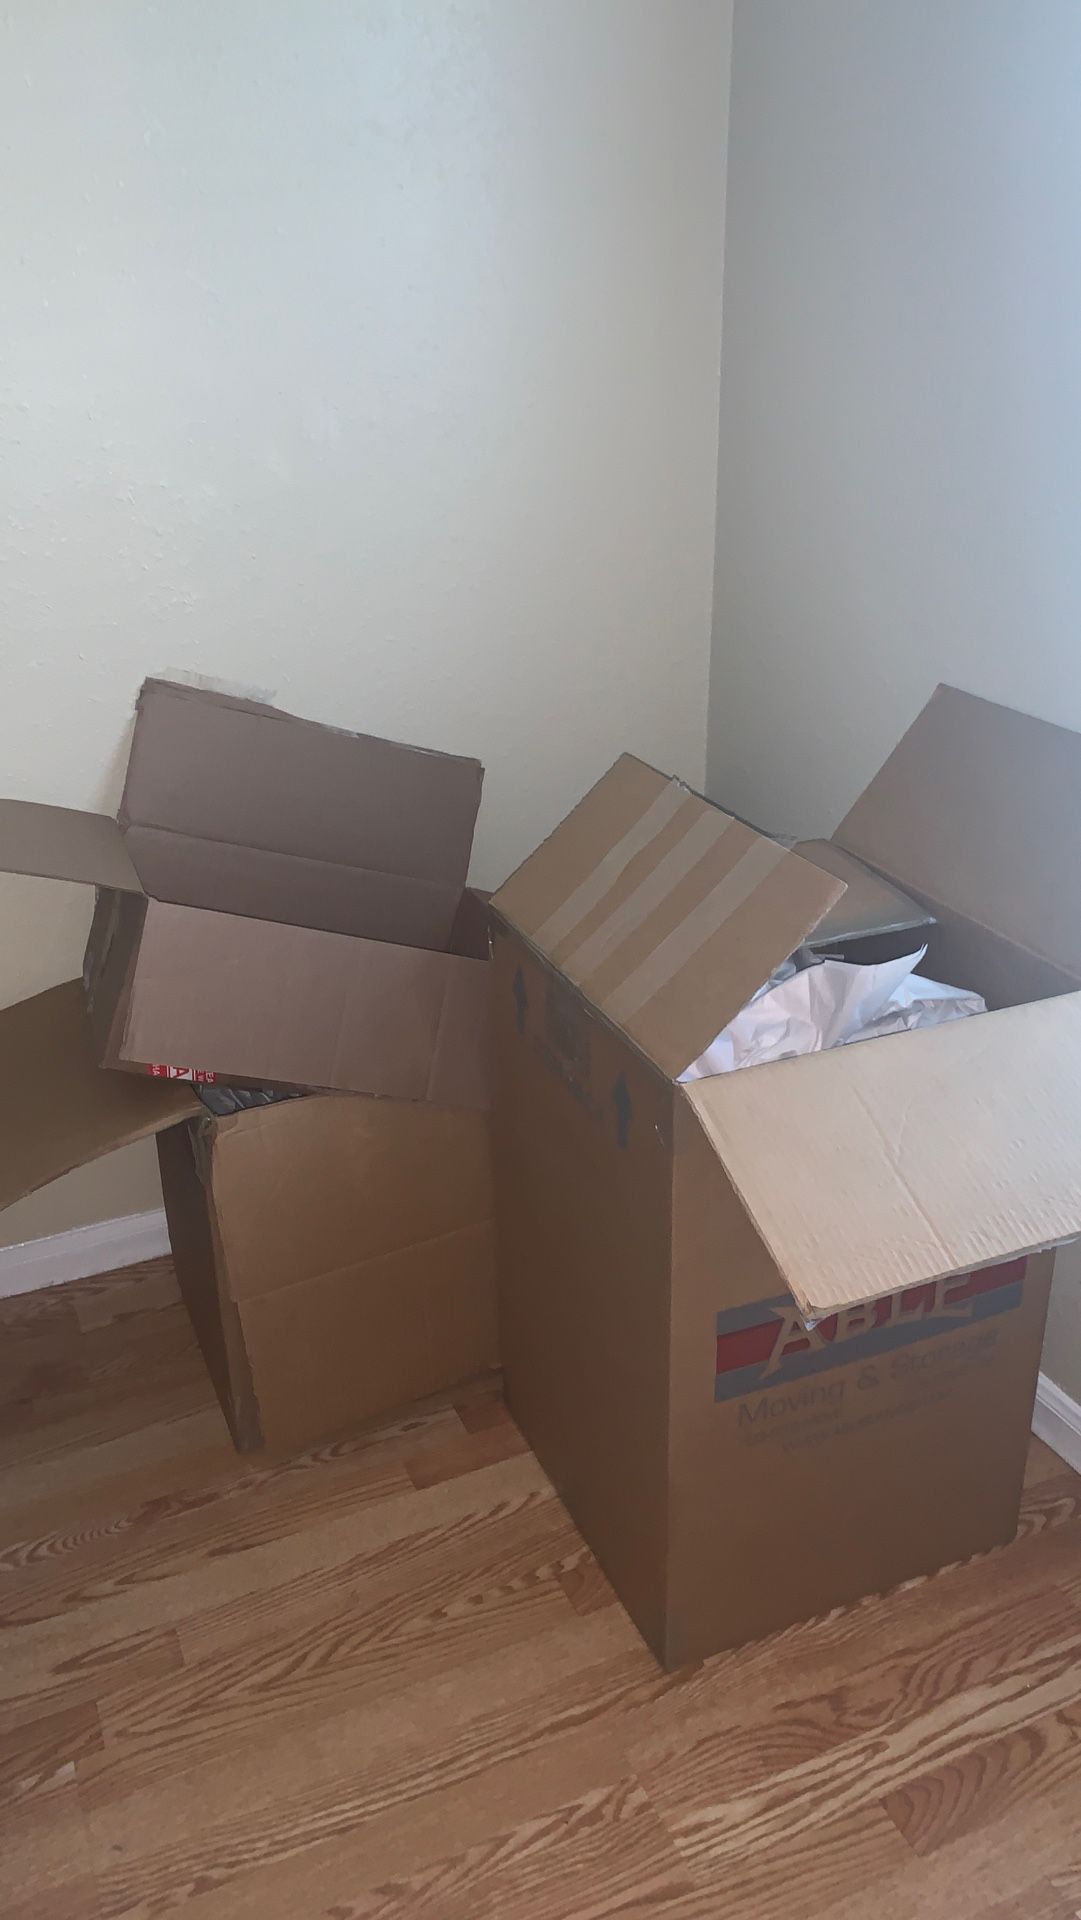 FREE MOVING BOXES W/ PACKING PAPER